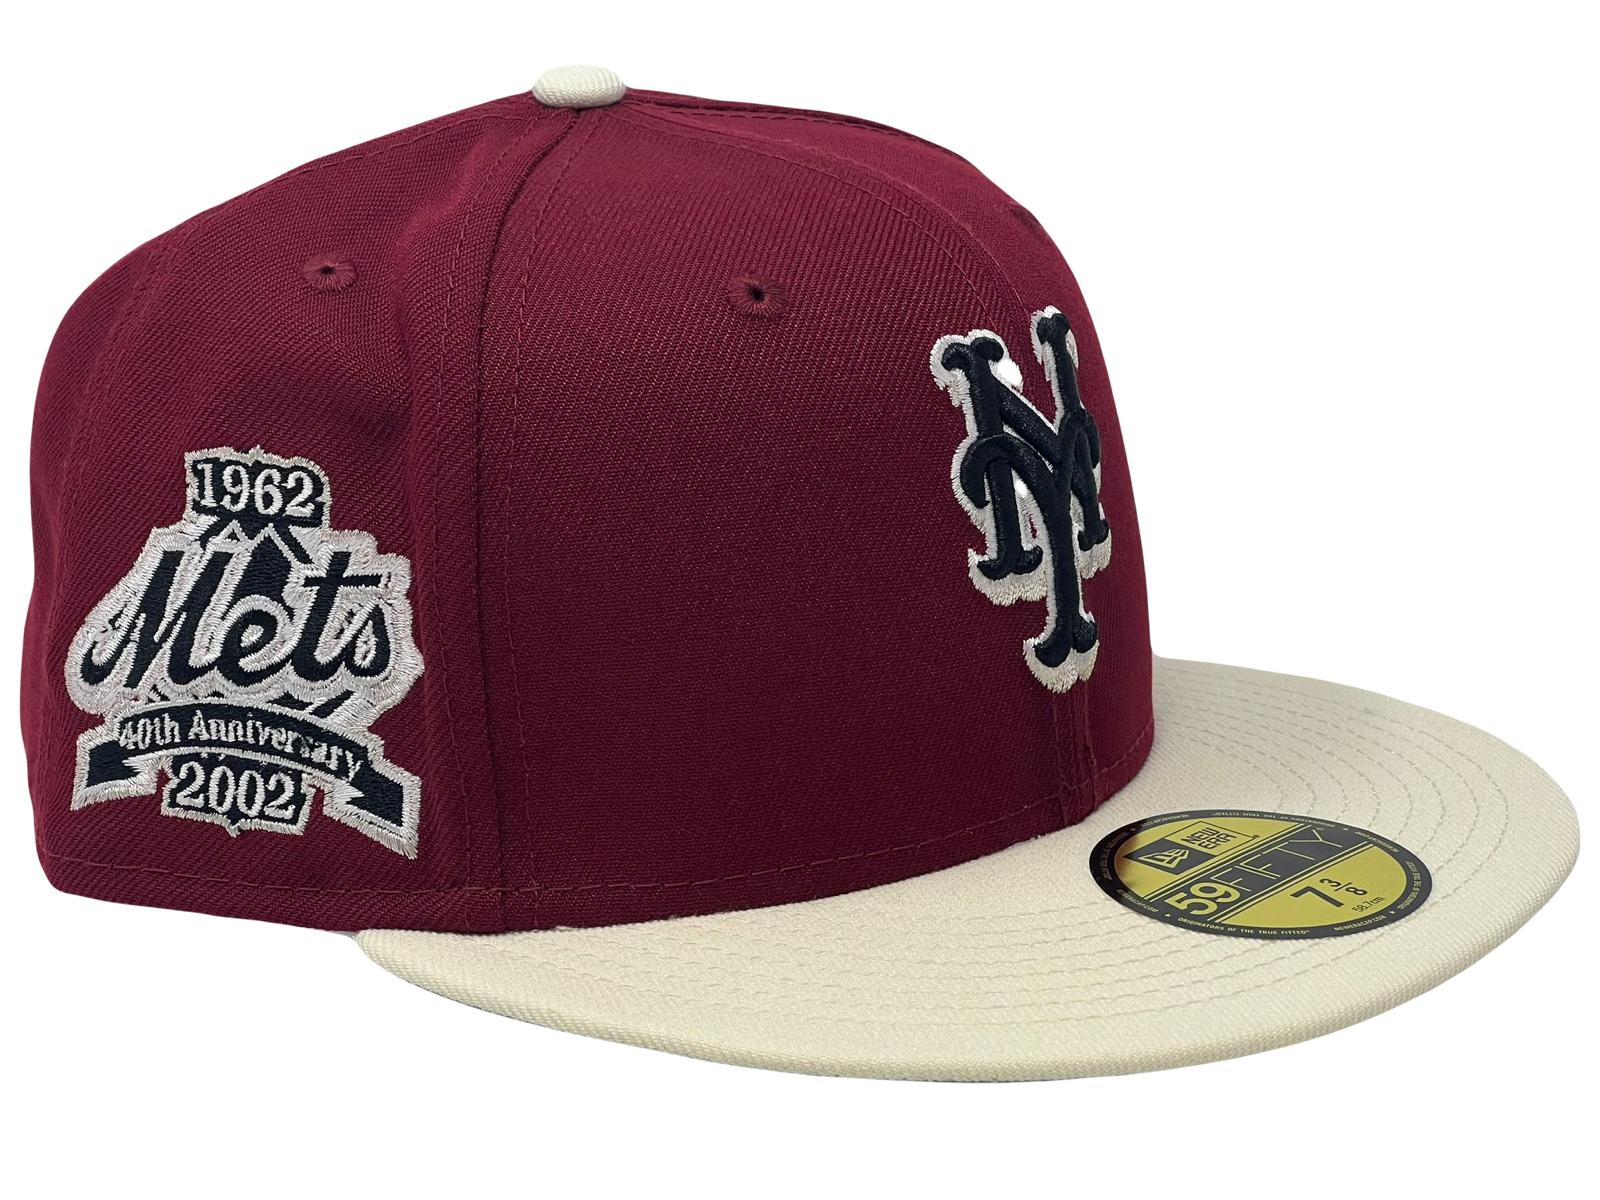 New York Mets New Era 59Fifty Fitted Hat (Team Color Pink Under Brim)